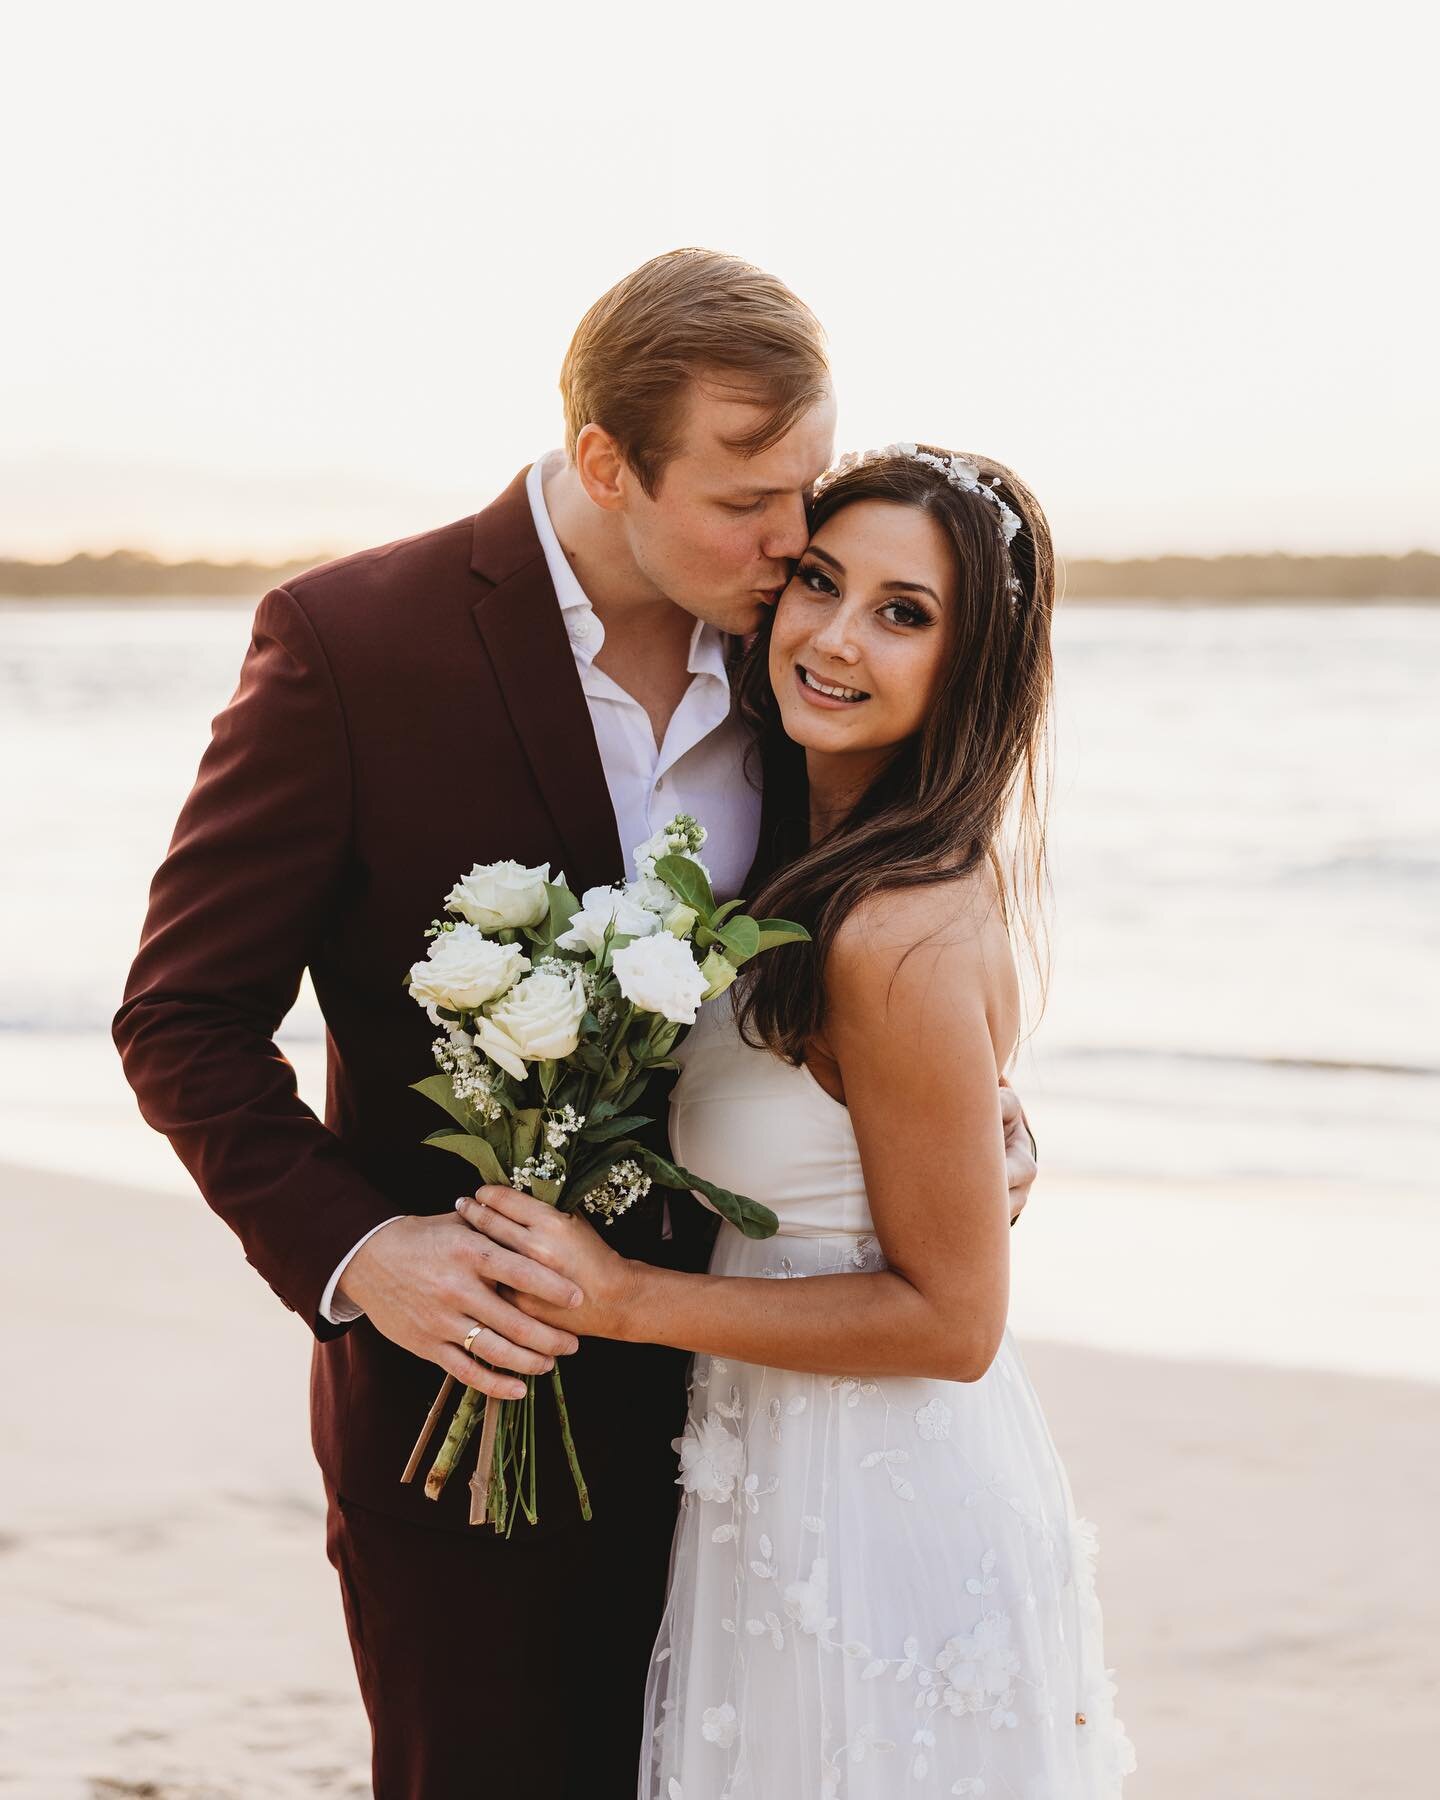 Sarah + Nicolai 🌹
A beautiful &amp; intimate ceremony at the Noosa River Entrance.
Super Duper Package sure is simple bliss! 💫
Celebrant @noosaheadscelebrant 
Photographer @leahcohenphotography 

#noosacelebrant #noosaphotographer #elopementpackage